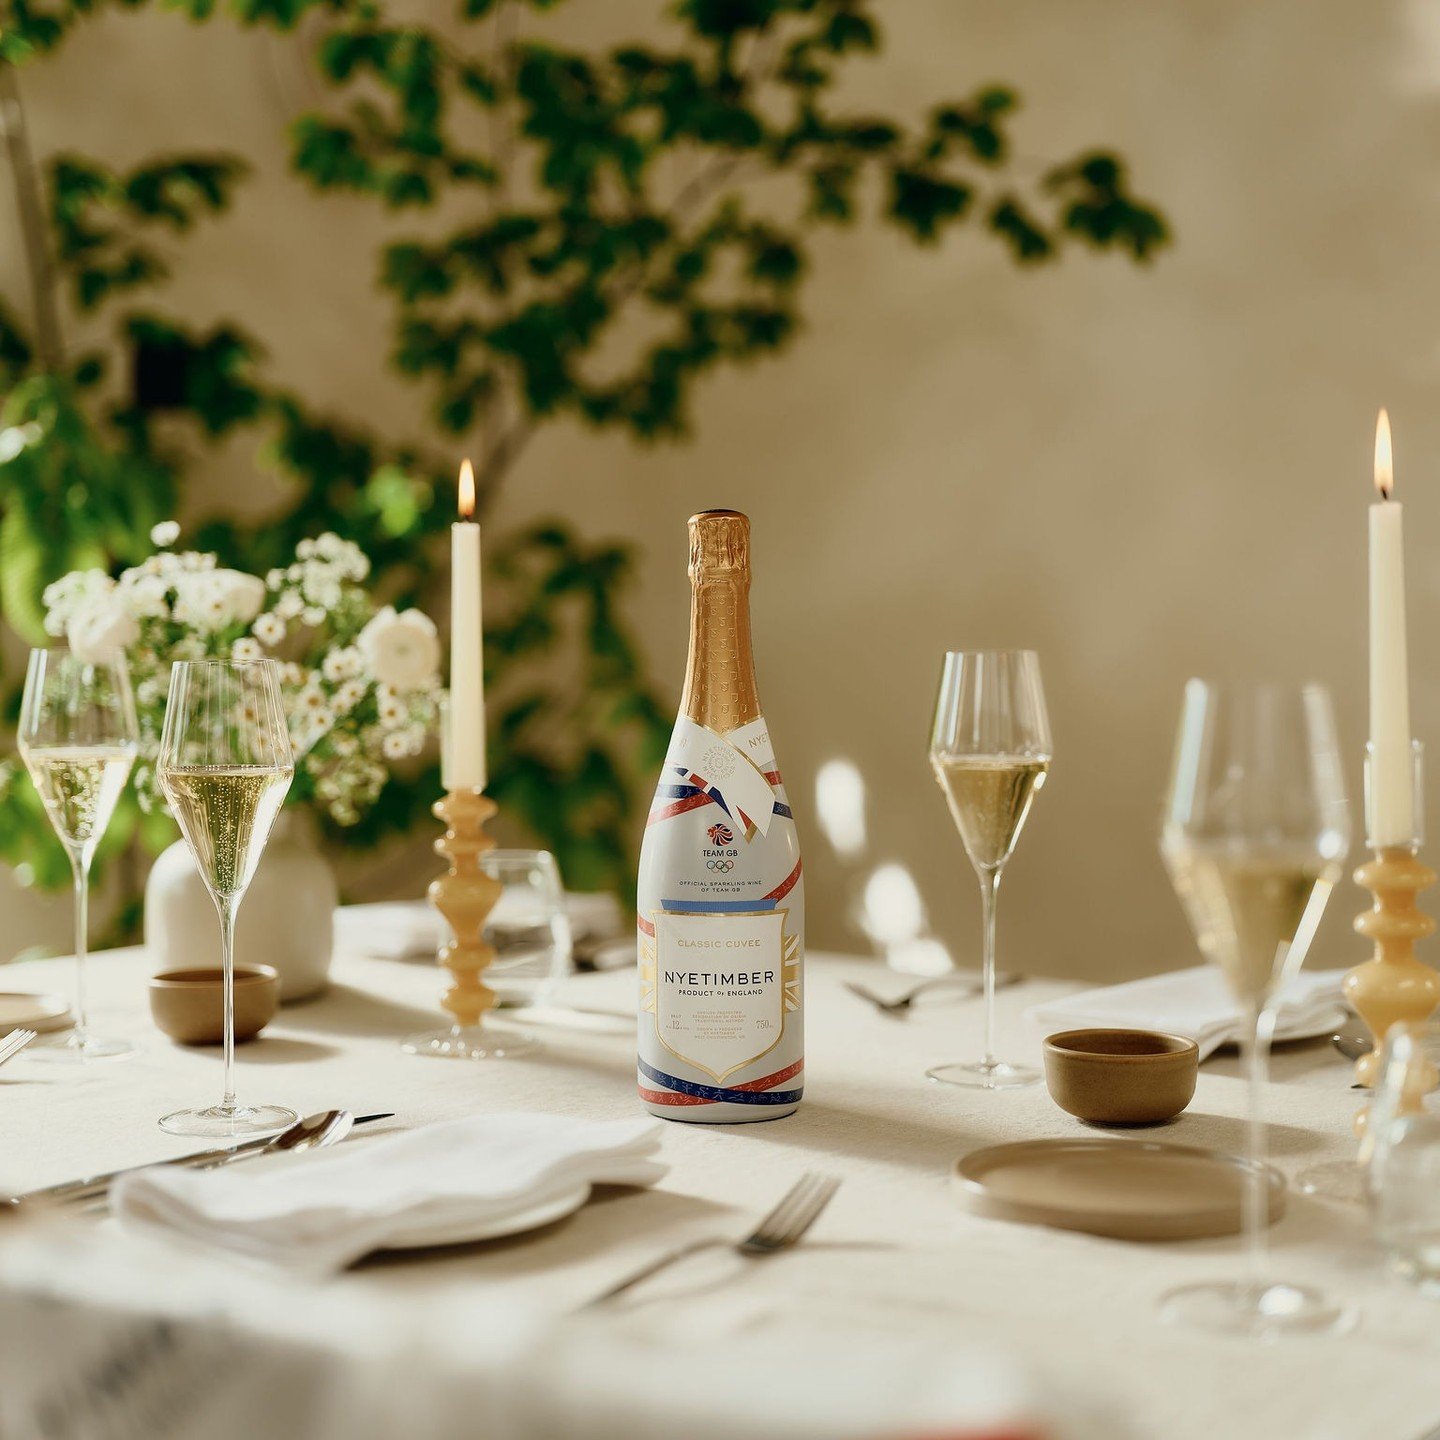 @nyetimber, the Official Sparkling Wine of Team GB for the Olympic Games in Paris 2024, has introduced its magnificent Limited-Edition Team GB Classic Cuvee Multi-Vintage bottle. This bottle is available in five different vintages. 

It is a mentalit